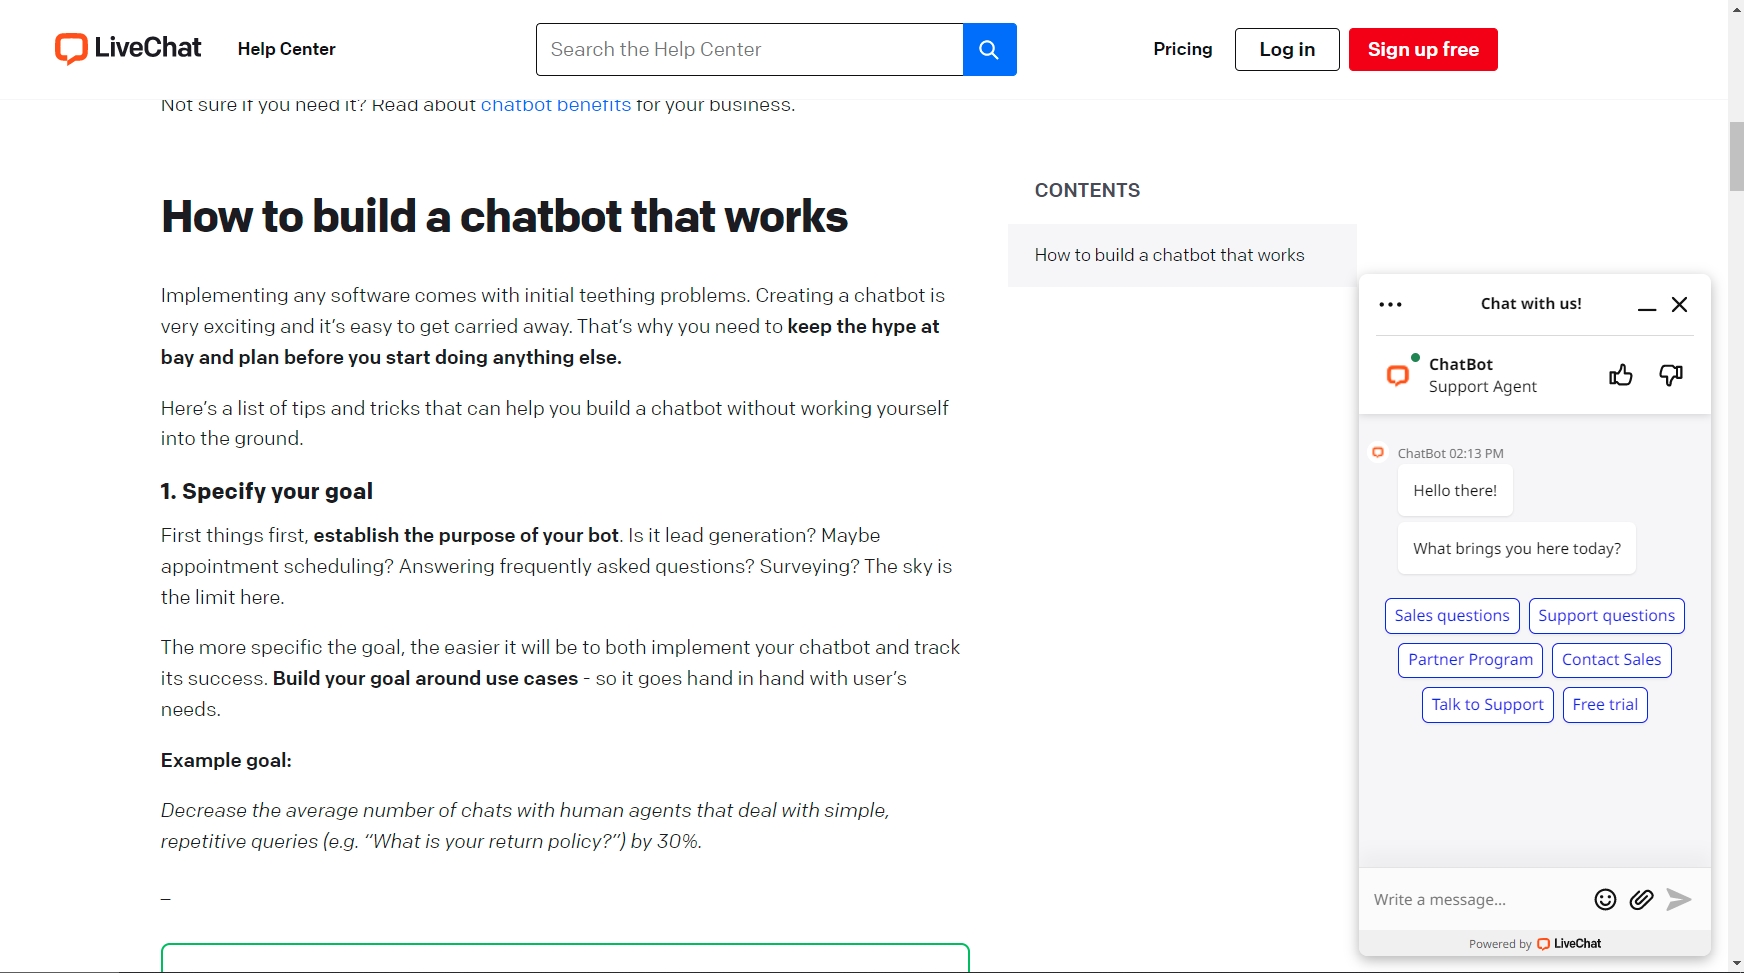 How to build a chatbot that works